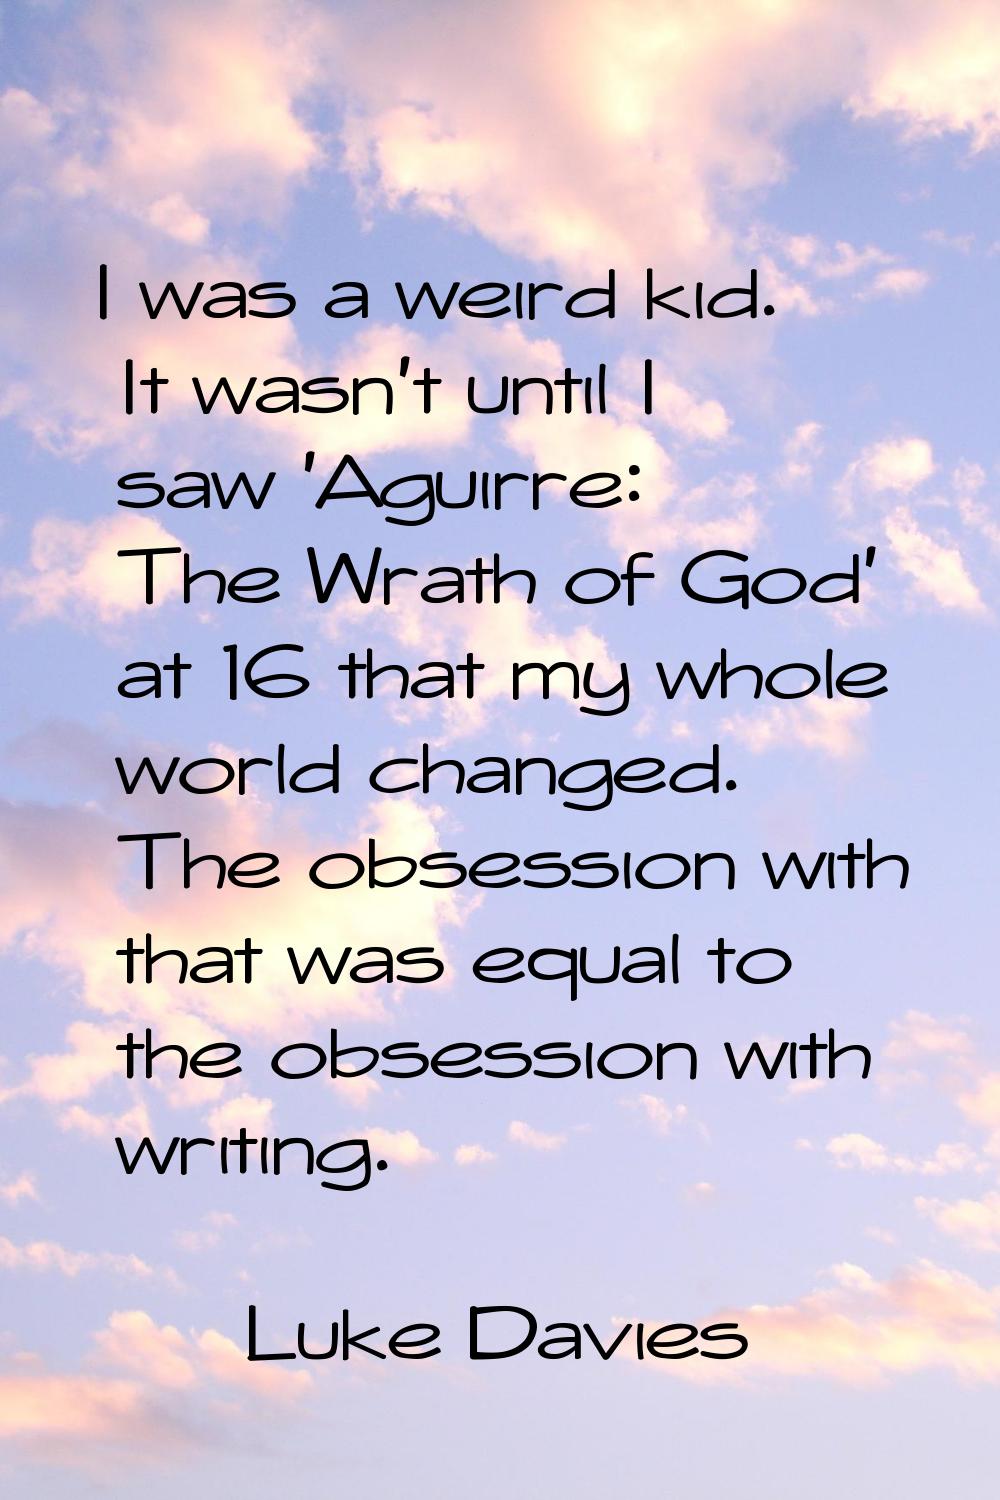 I was a weird kid. It wasn't until I saw 'Aguirre: The Wrath of God' at 16 that my whole world chan